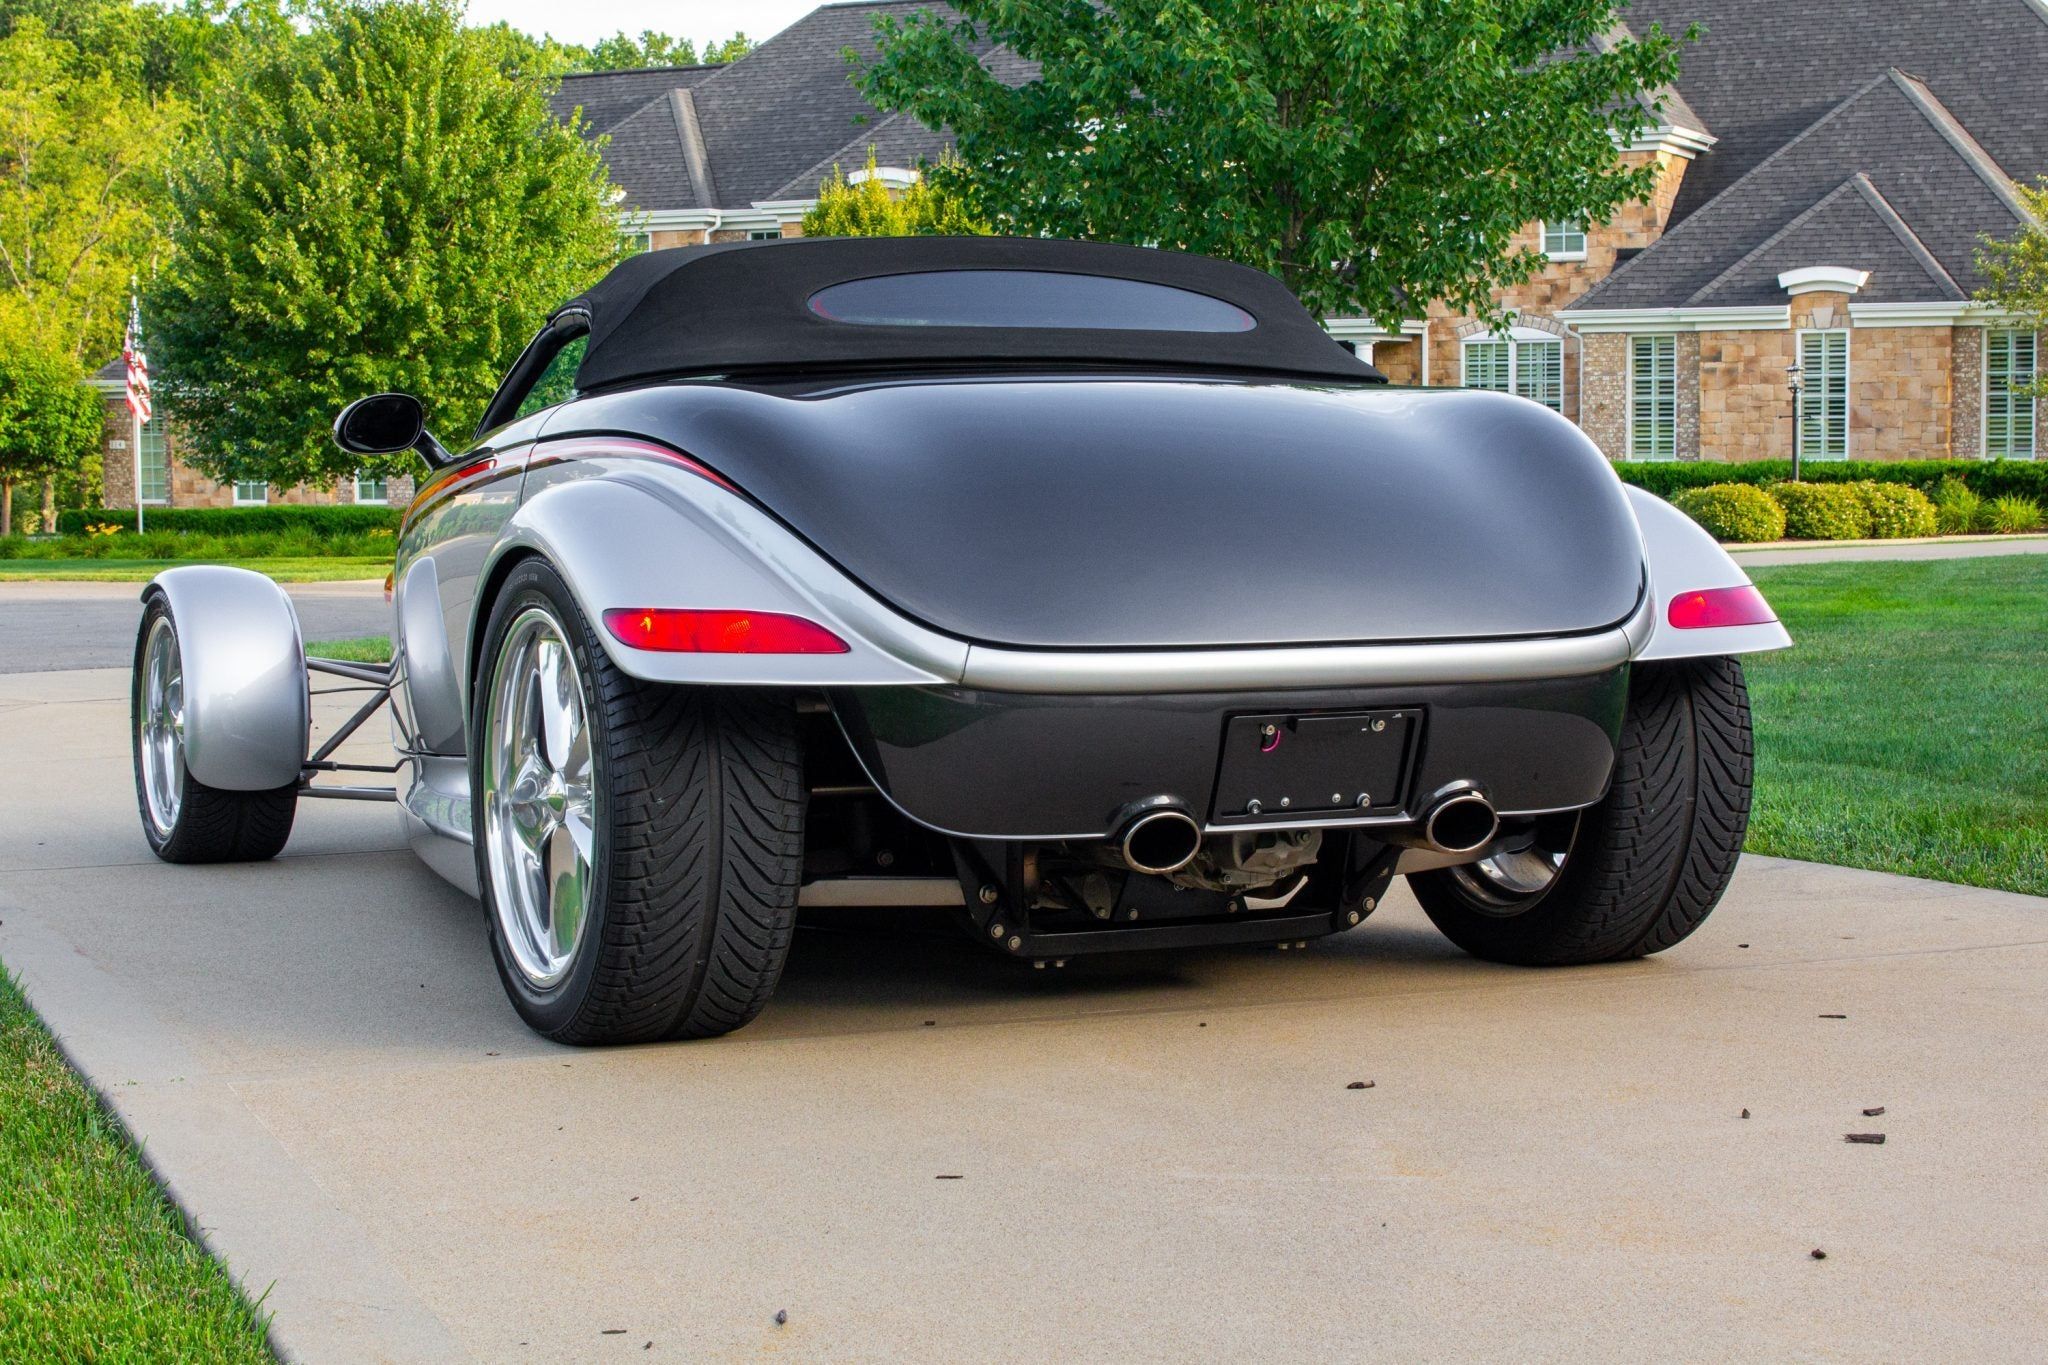 LS-Swapped 1999 Plymouth Prowler rear end